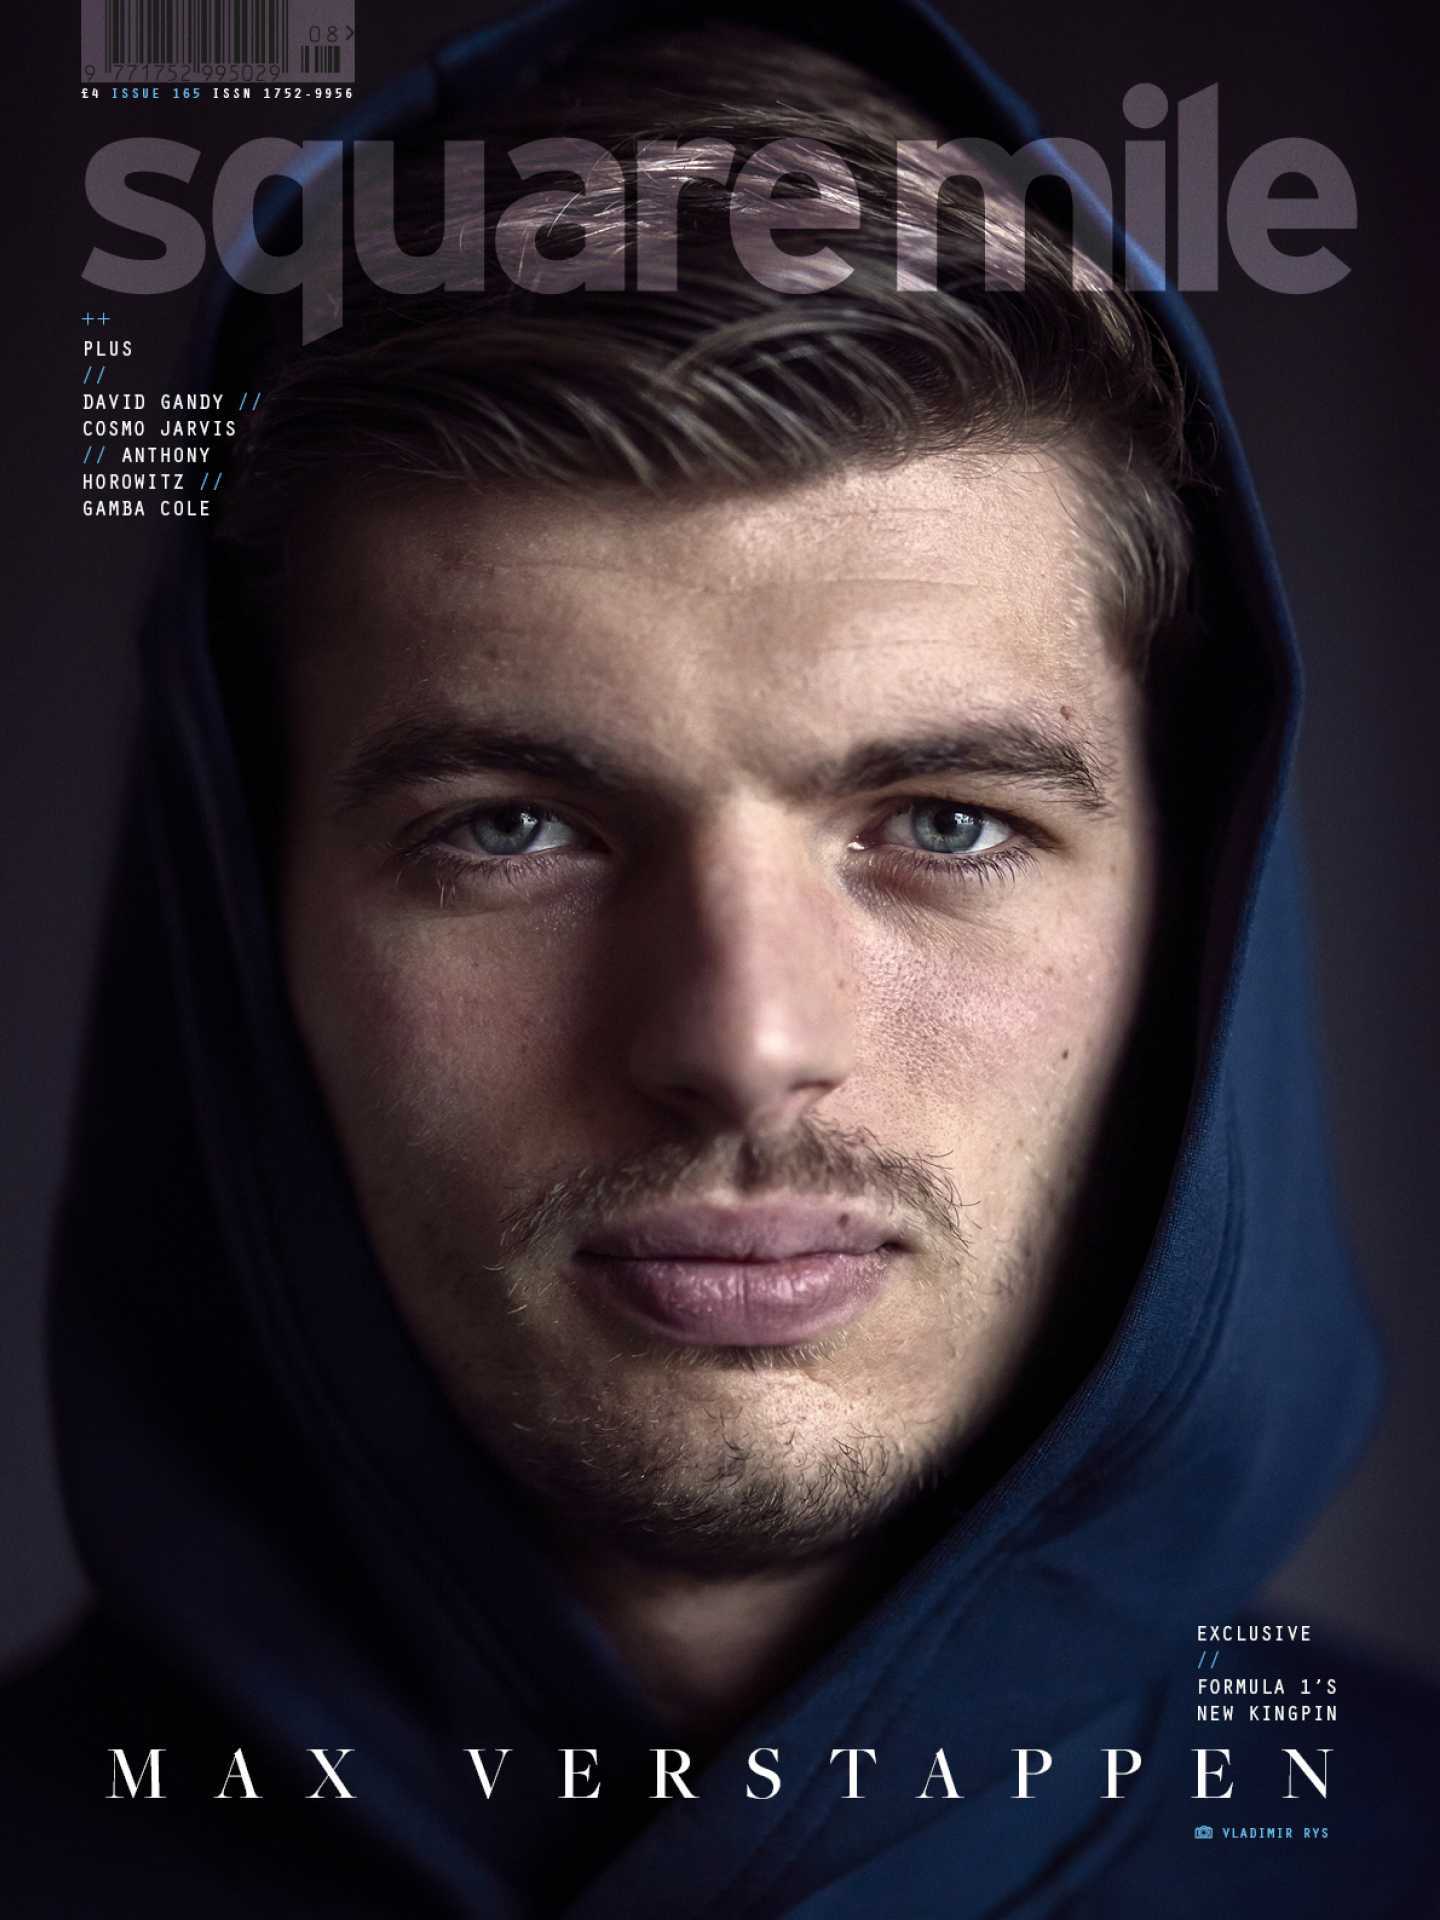 Max Verstappen photographed by Vladimir Rys for Square Mile